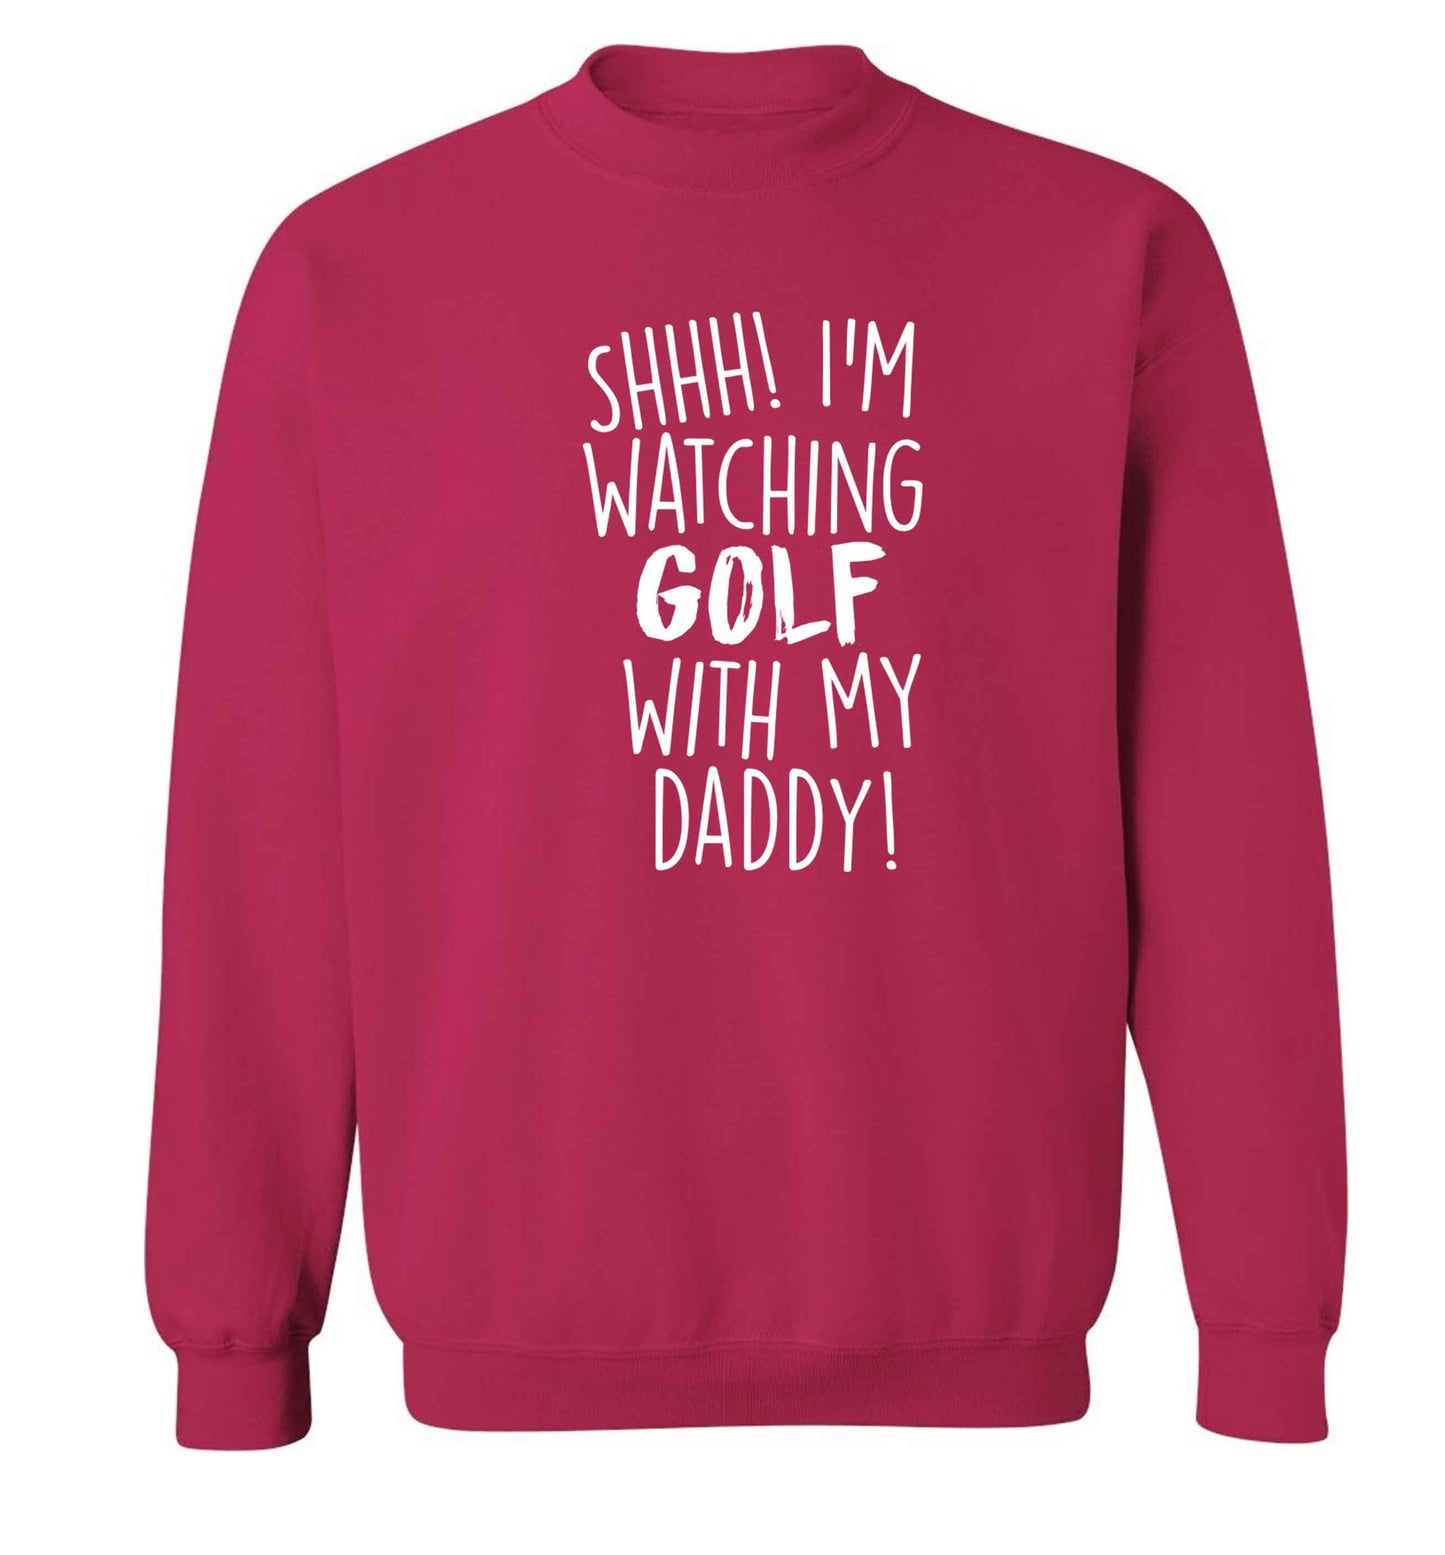 Shh I'm watching golf with my daddy Adult's unisex pink Sweater 2XL